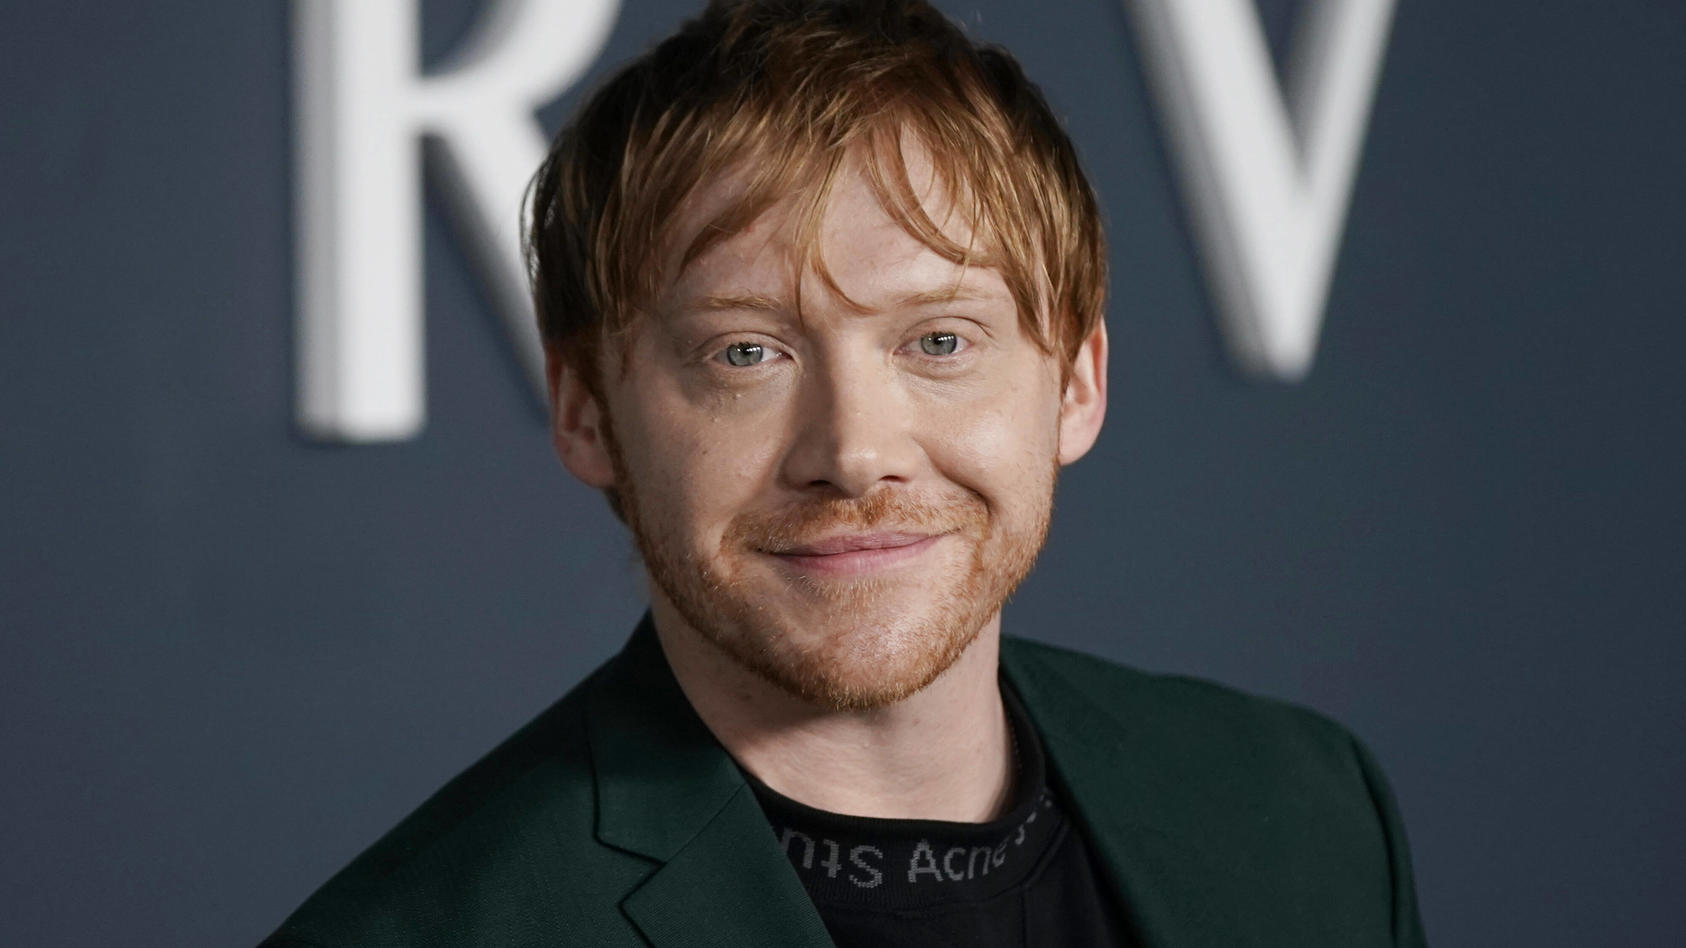  Entertainment Bilder des Tages Rupert Grint arrives on the red carpet at the world premiere of Apple TV s Servant at BAM Howard Gilman Opera House on Tuesday, November 19, 2019 in New York City. PUBLICATIONxINxGERxSUIxAUTxHUNxONLY NYP20191119107 JOH